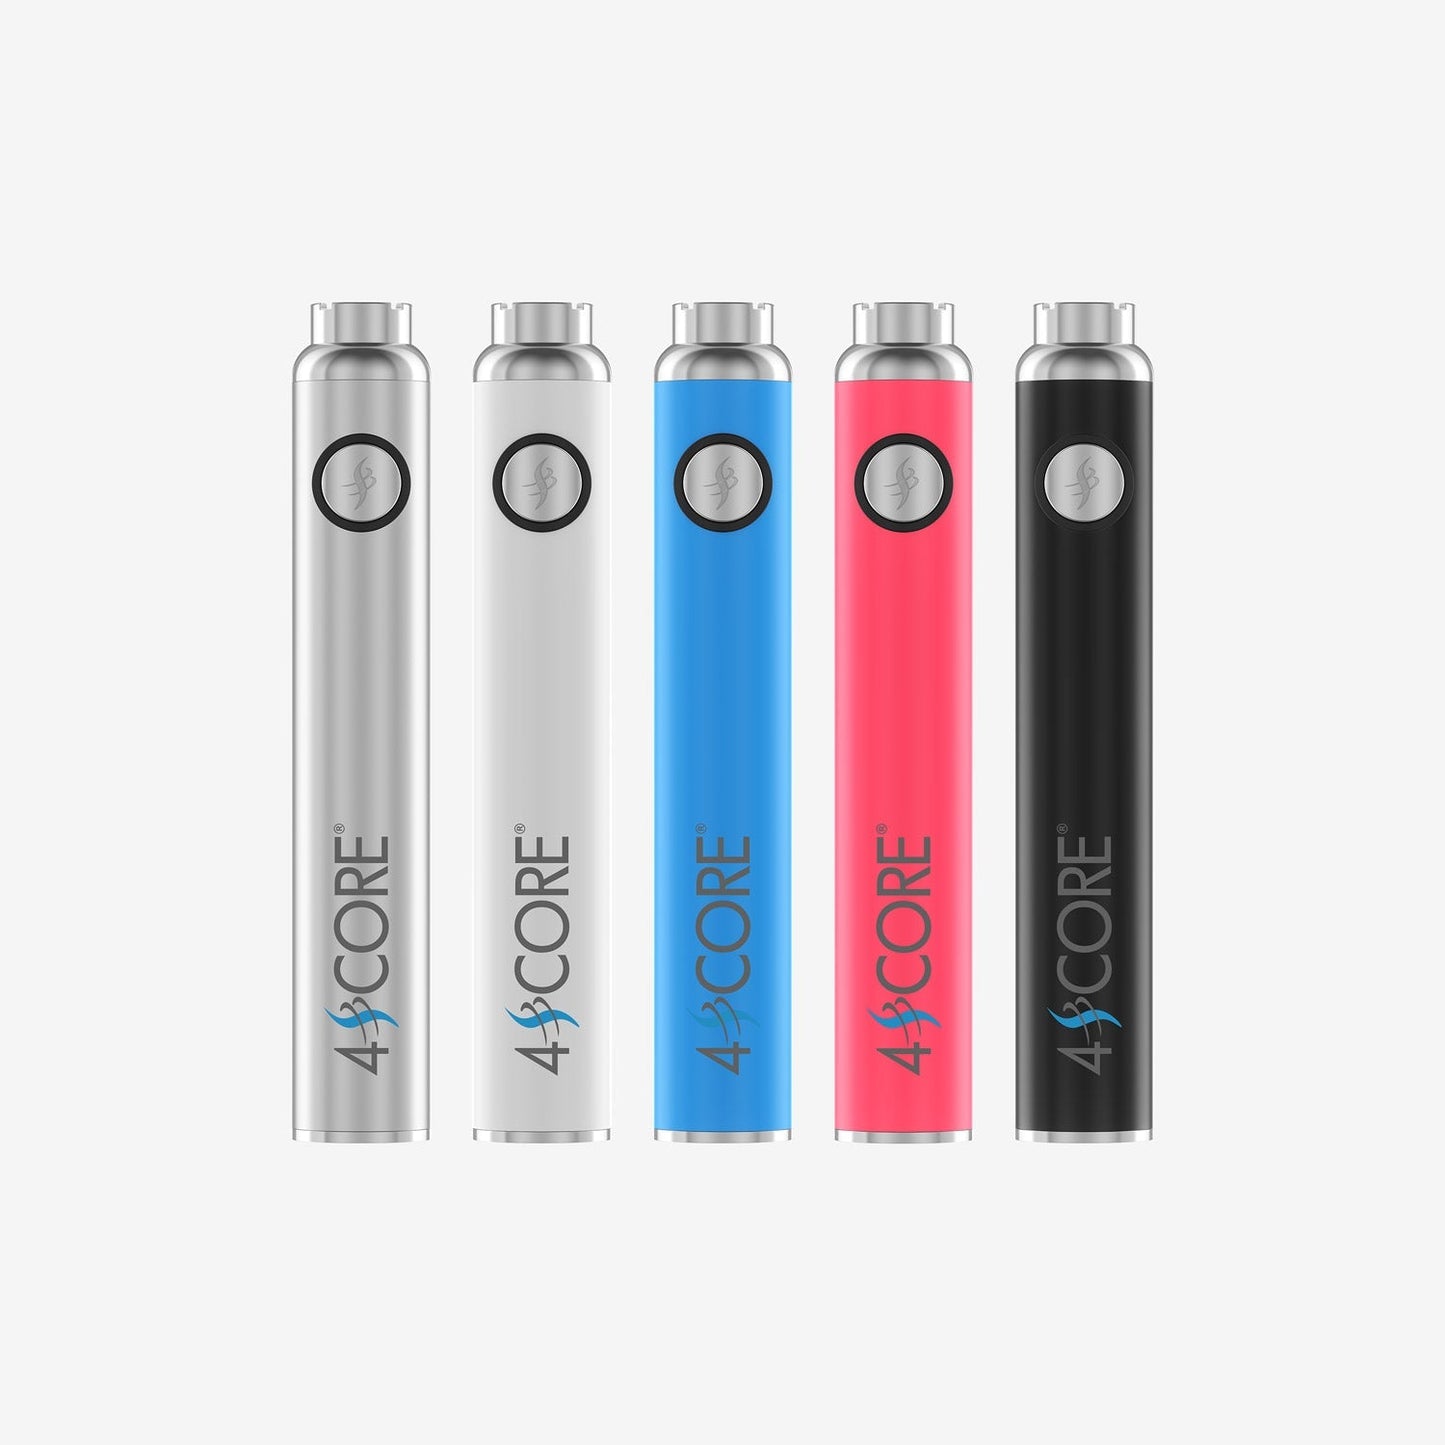 4Score Vape Pen Battery Pack - Day Pen - with USB Charger - Mother